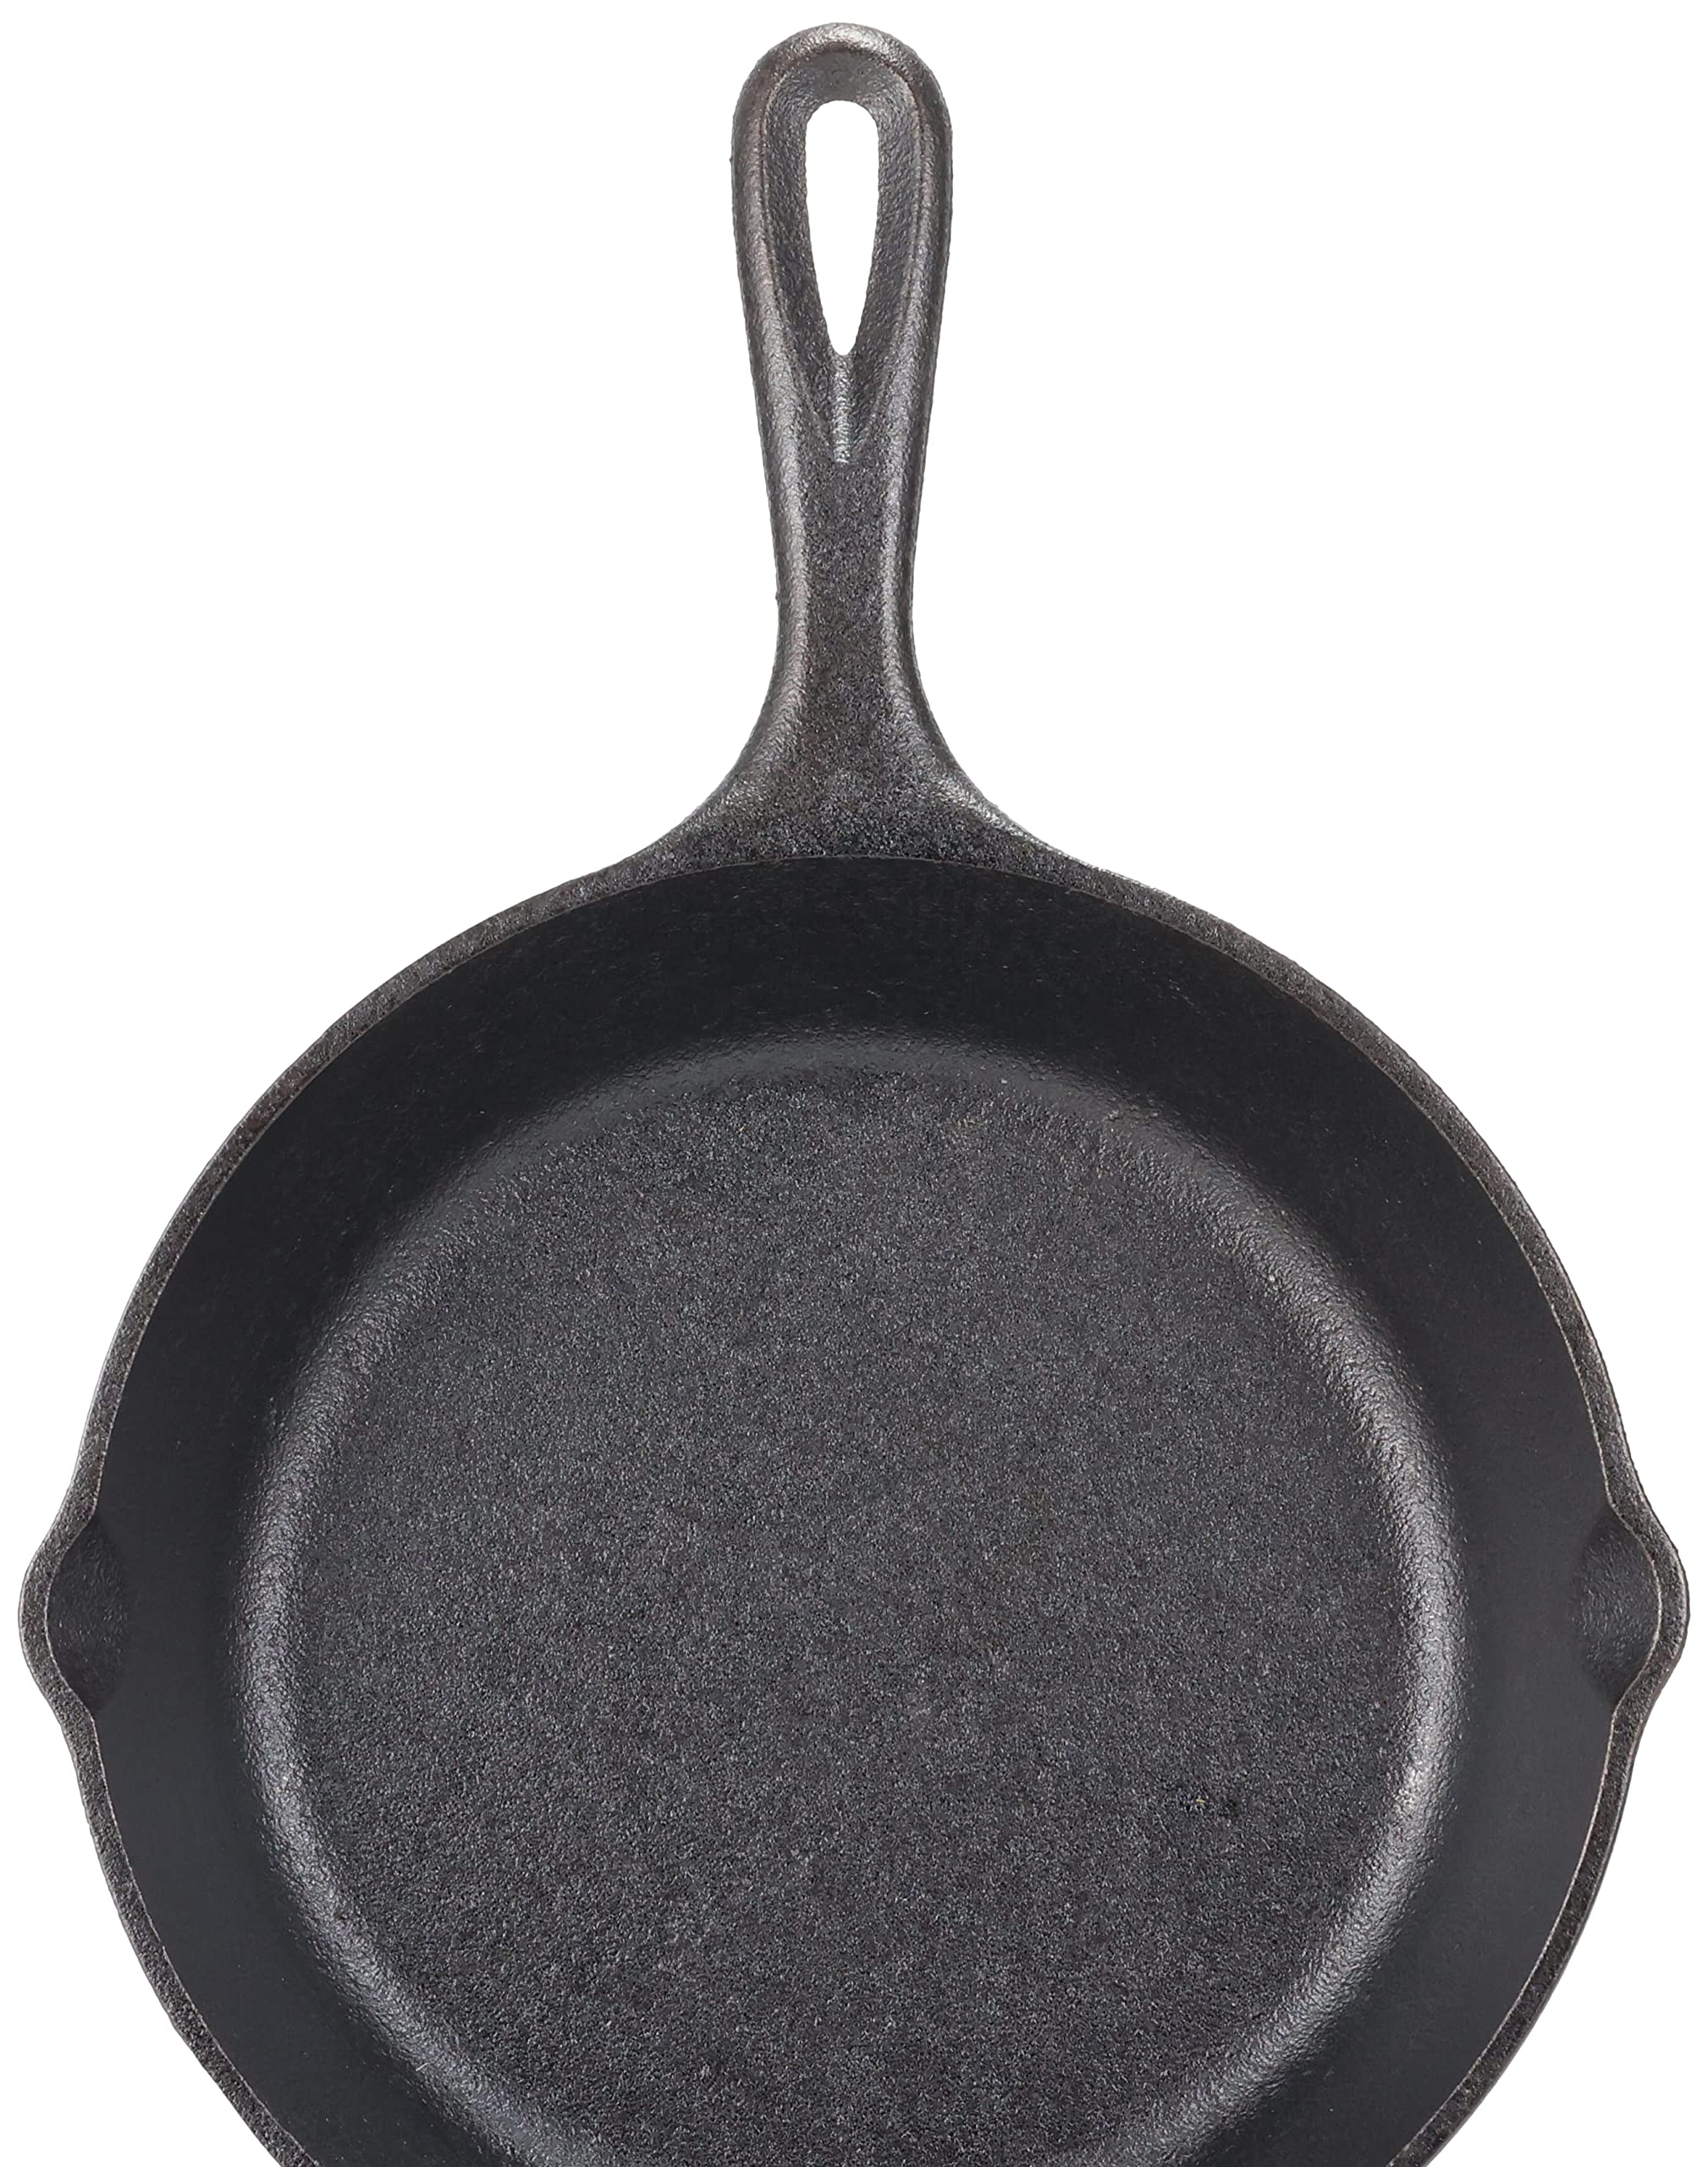 Lodge 3.5 Inch Miniature Cast Iron Pre-Seasoned Skillet – Signature Teardrop Handle - Use in the Oven, on the Stove, on the Grill, or Over a Campfire, Black